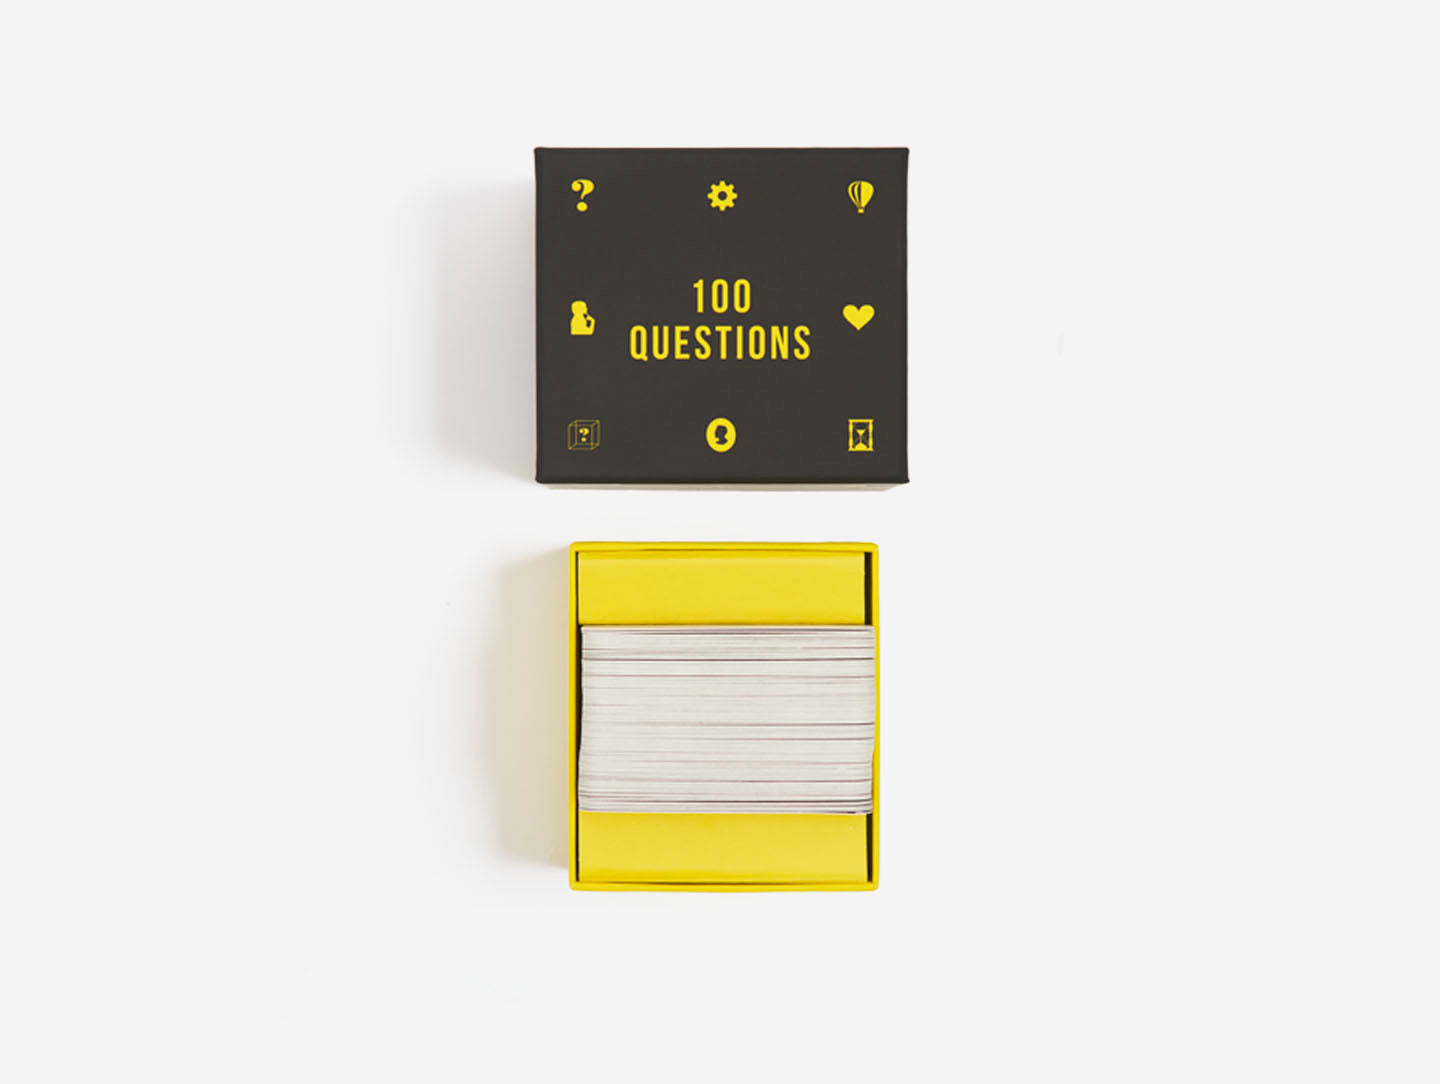 100 Questions Game